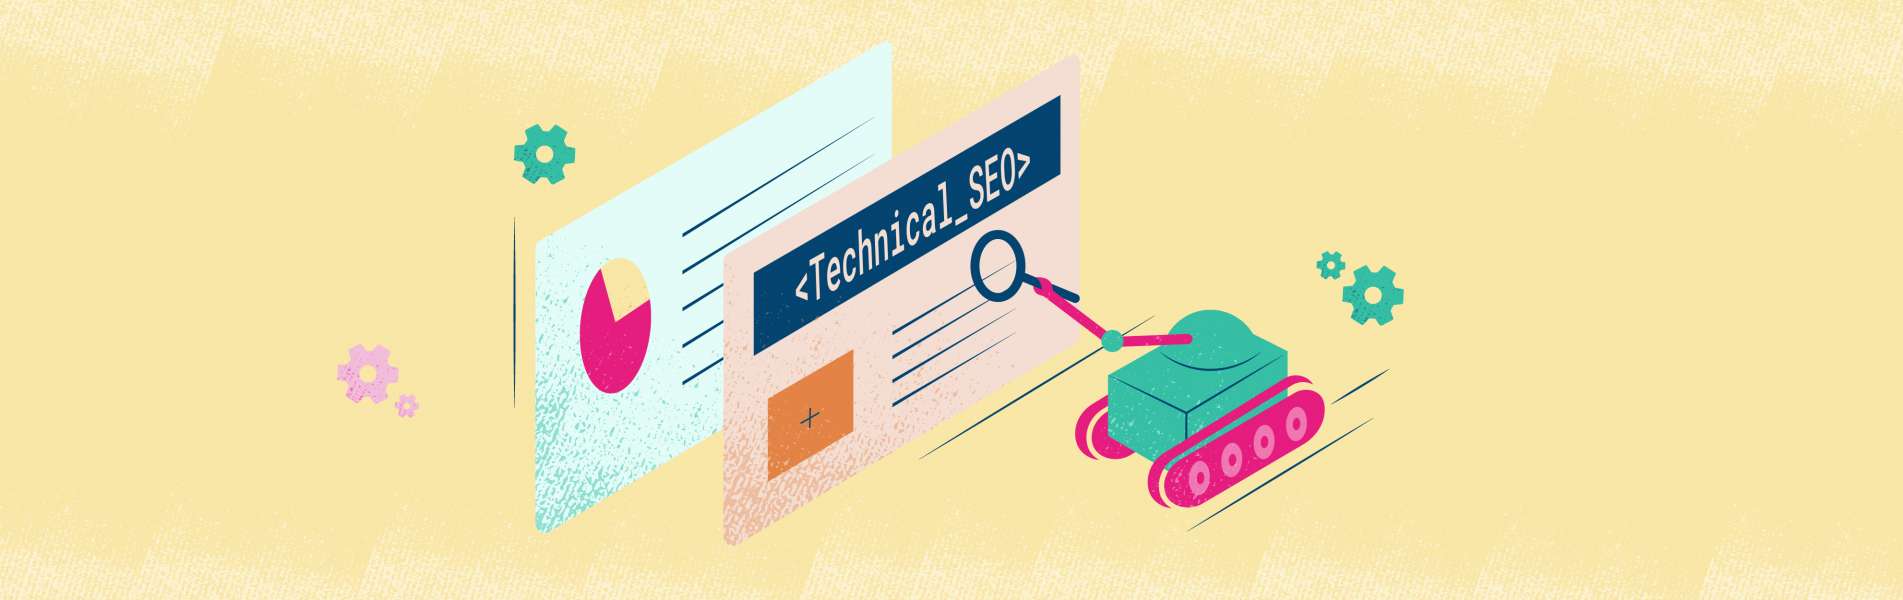 Technical SEO for eCommerce Sites